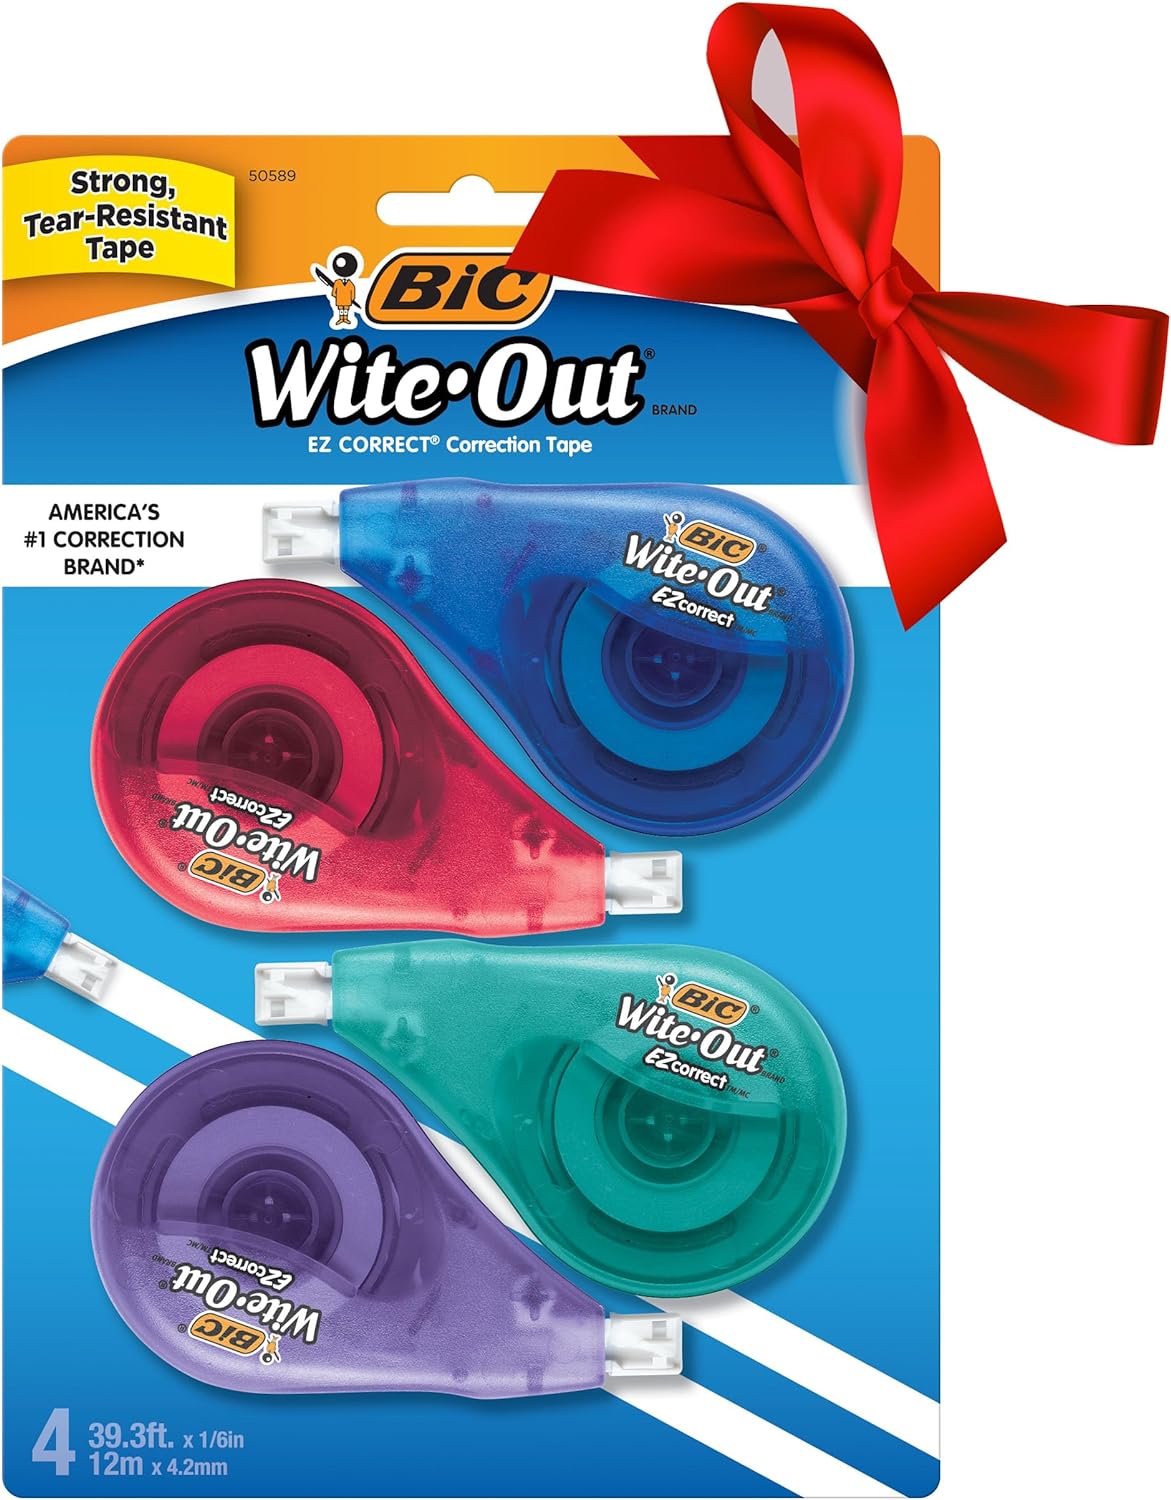 BIC Wite-Out Brand EZ Correct Correction Tape, 19.8 Feet, 4-Count Pack of white Correction Tape, Fast, Clean and Easy to Use Tear-Resistant Tape, Great Stocking Stuffers for Teachers